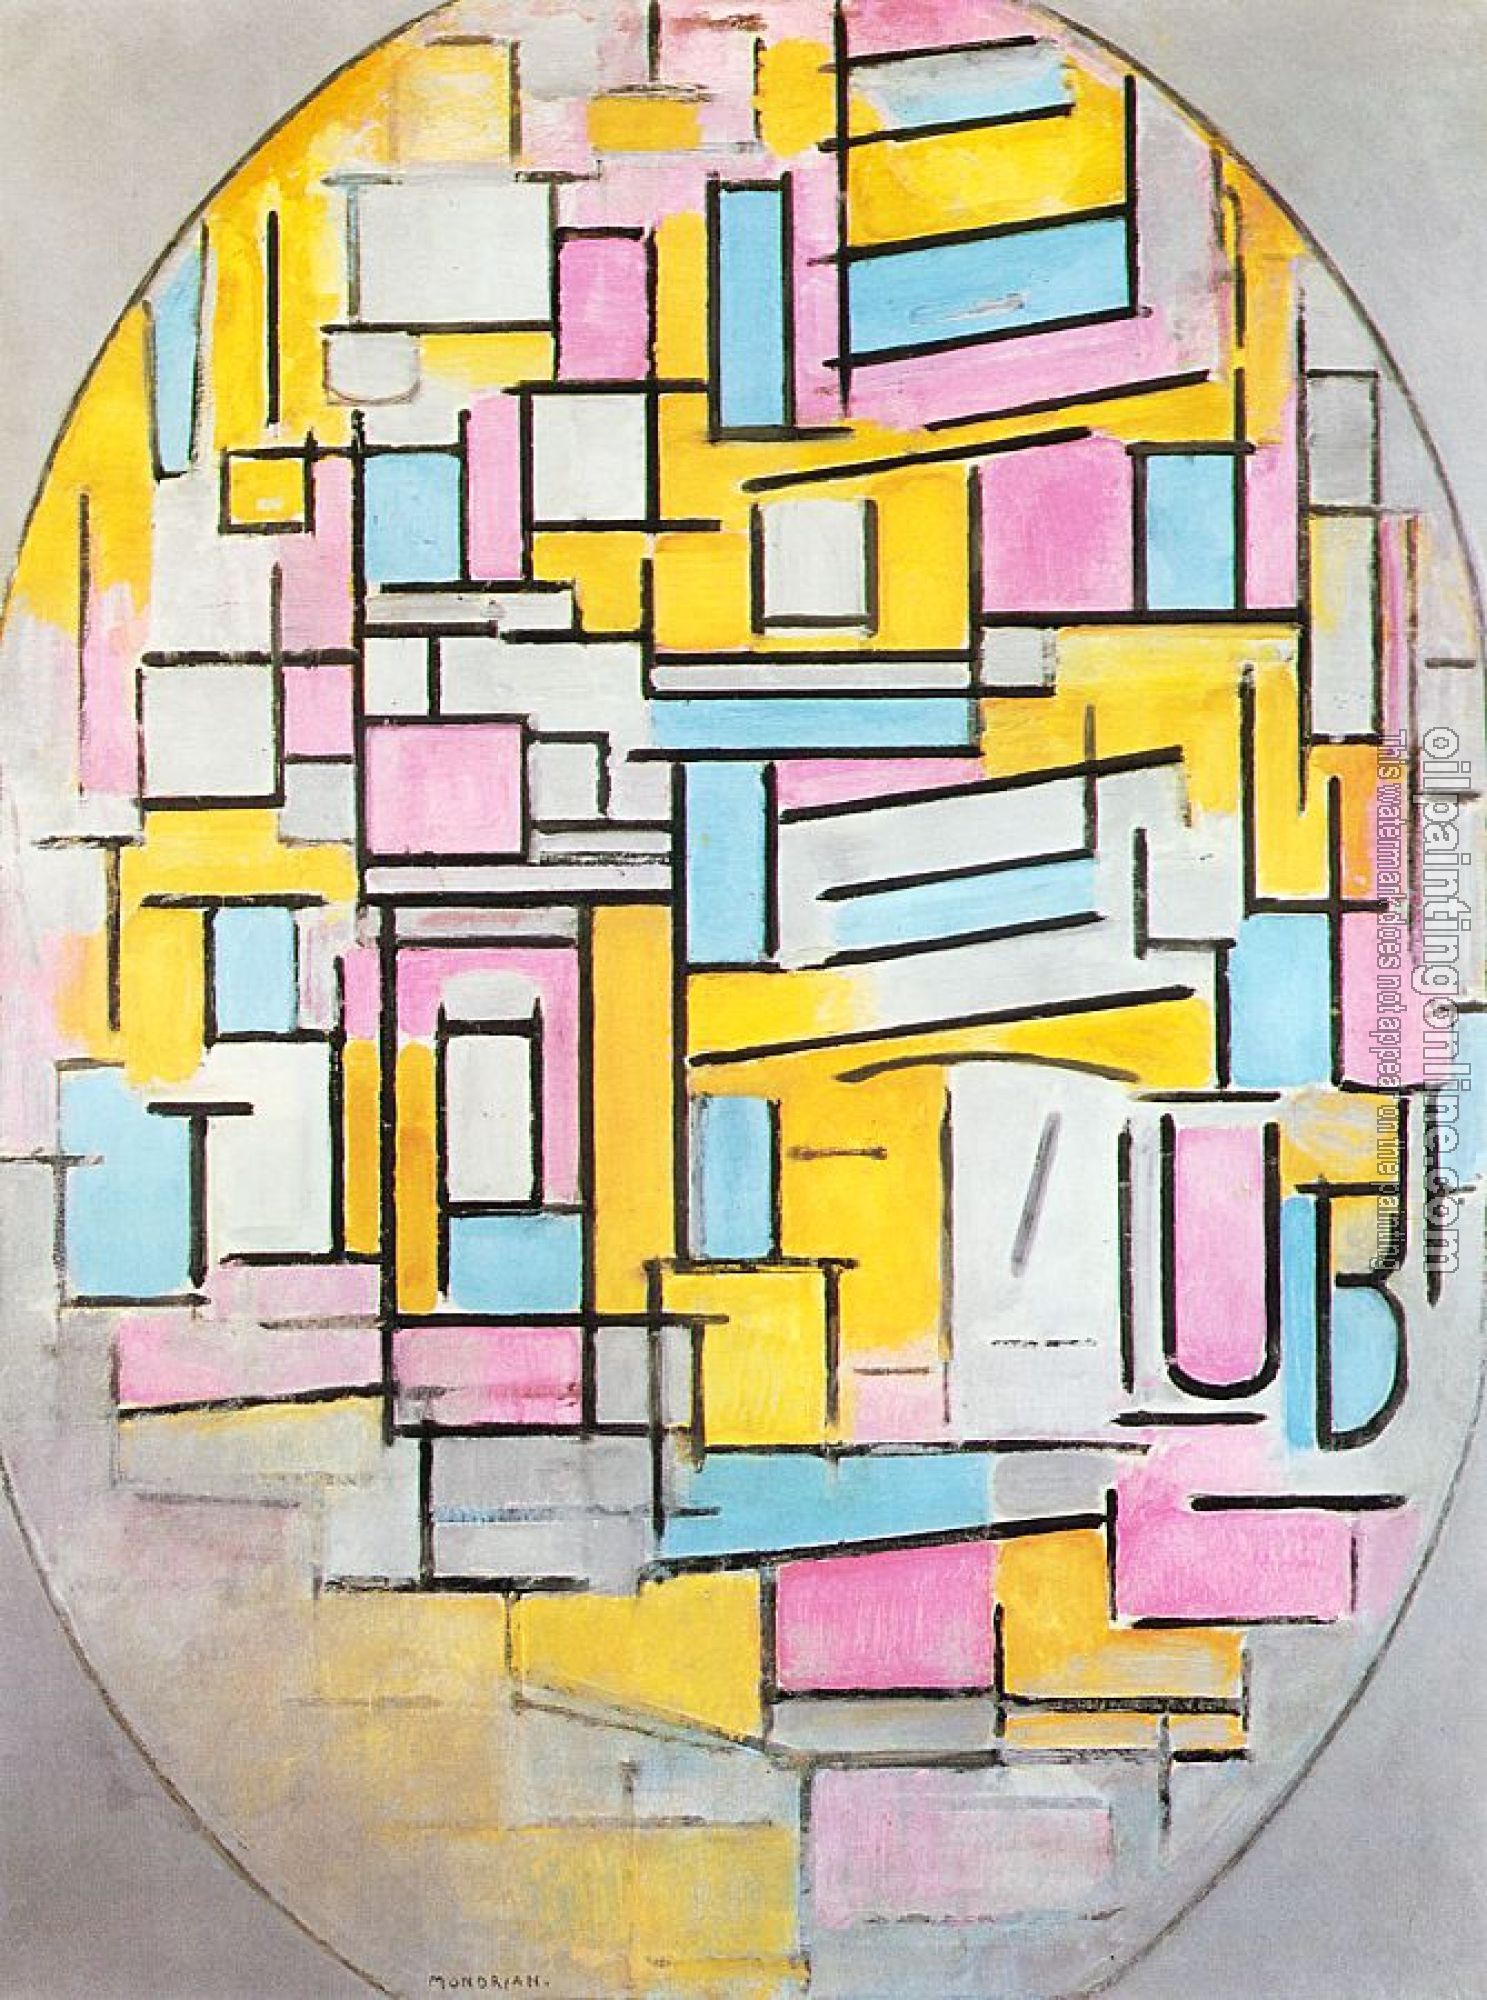 Mondrian, Piet - Composition with Oval in Color Planes II